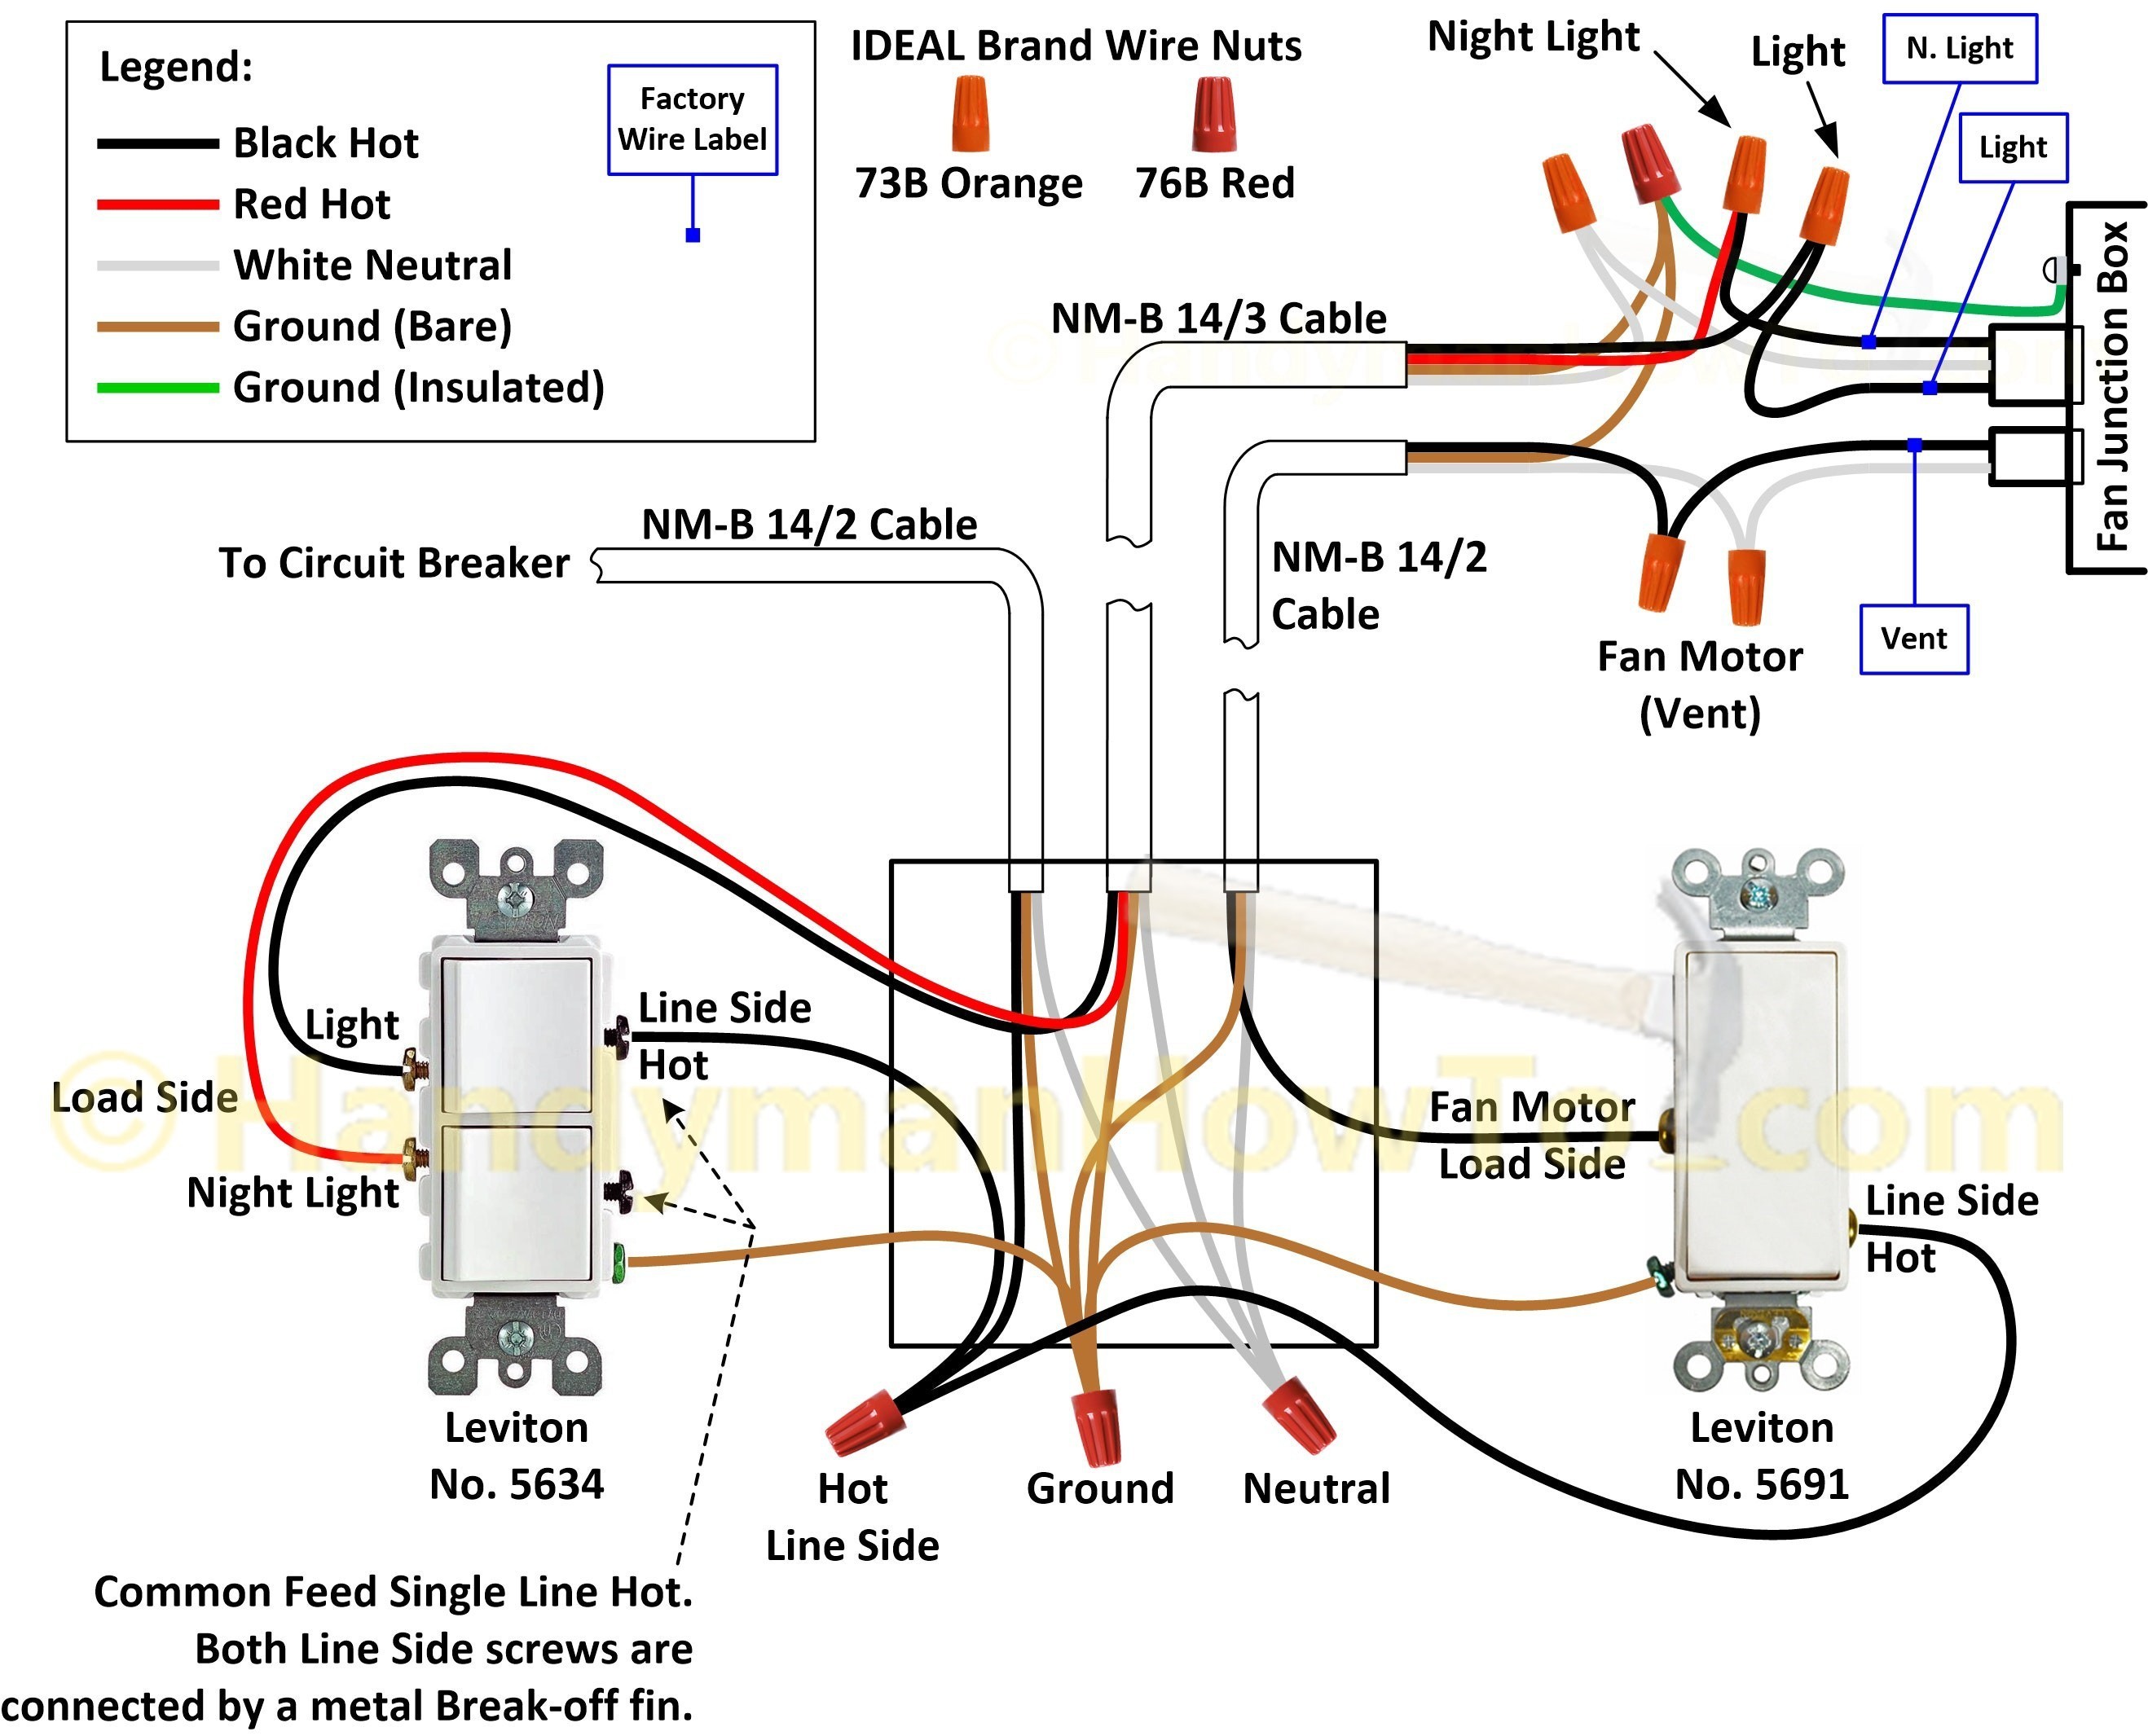 Wiring Diagram for Navigation Lights Valid Fresh How to Wire A Double Switch to Two Separate